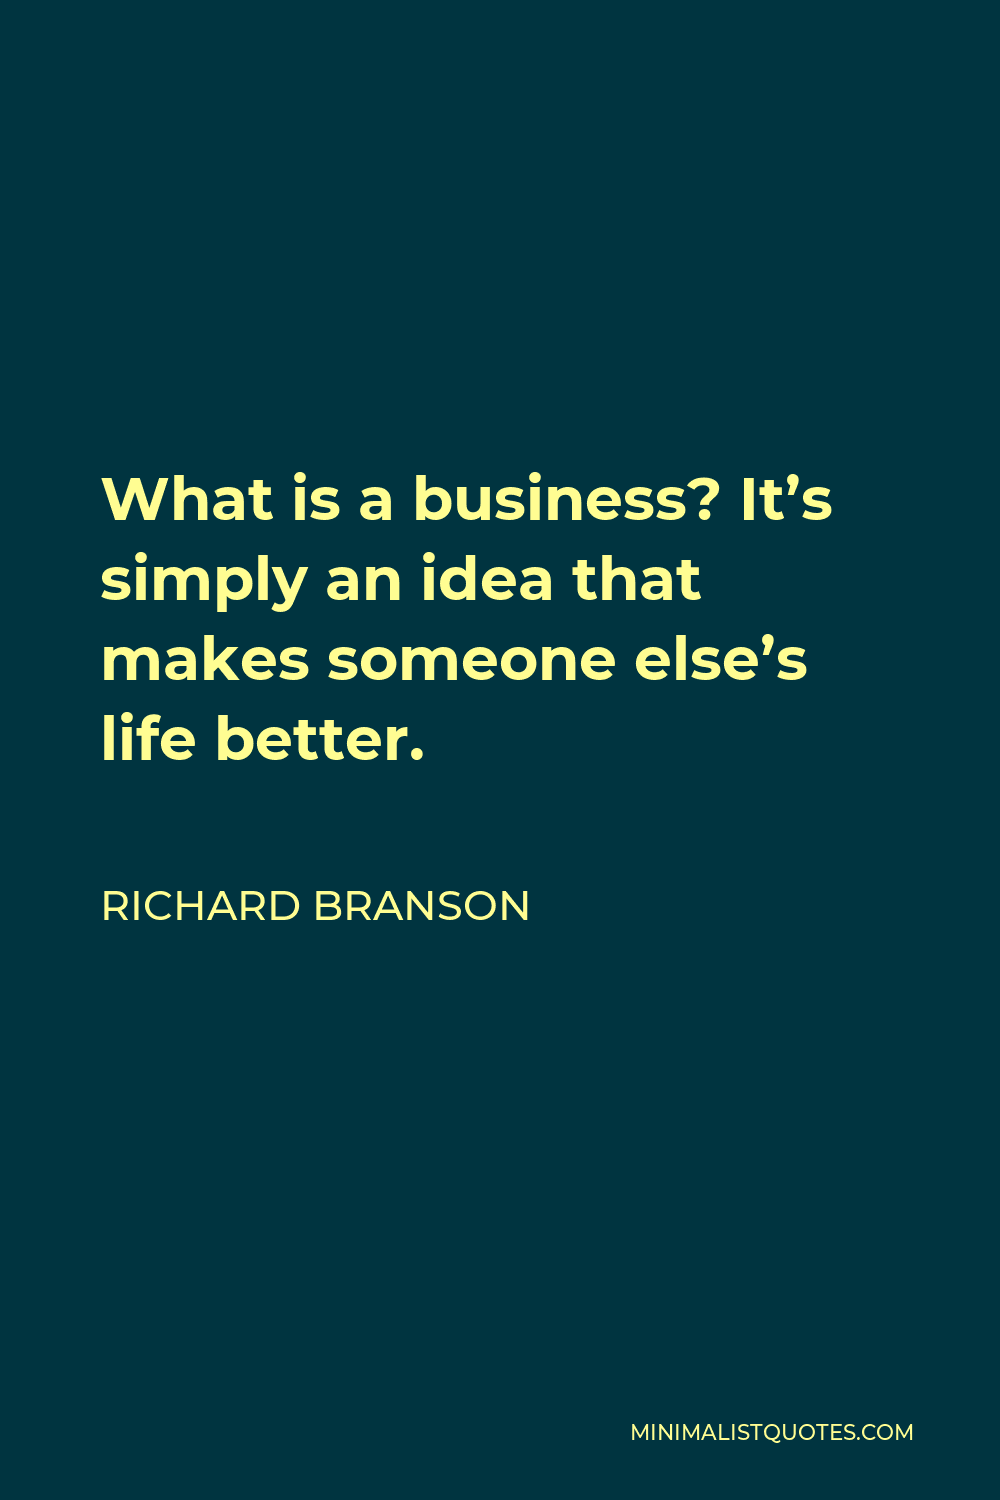 Richard Branson Quote - What is a business? It’s simply an idea that makes someone else’s life better.